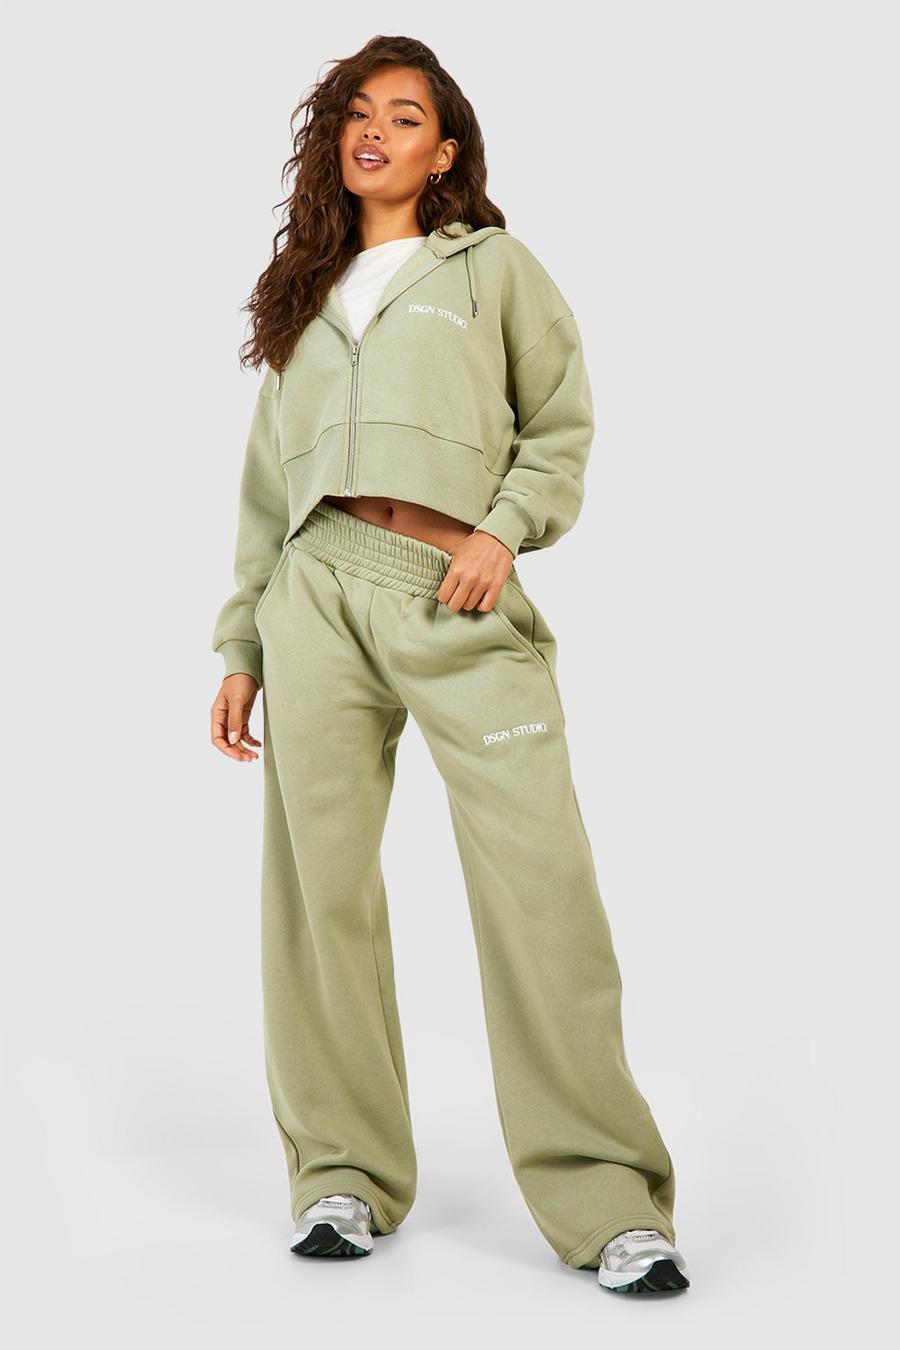 Sage green Dsgn Studio Cropped Zip Through Hooded Tracksuit